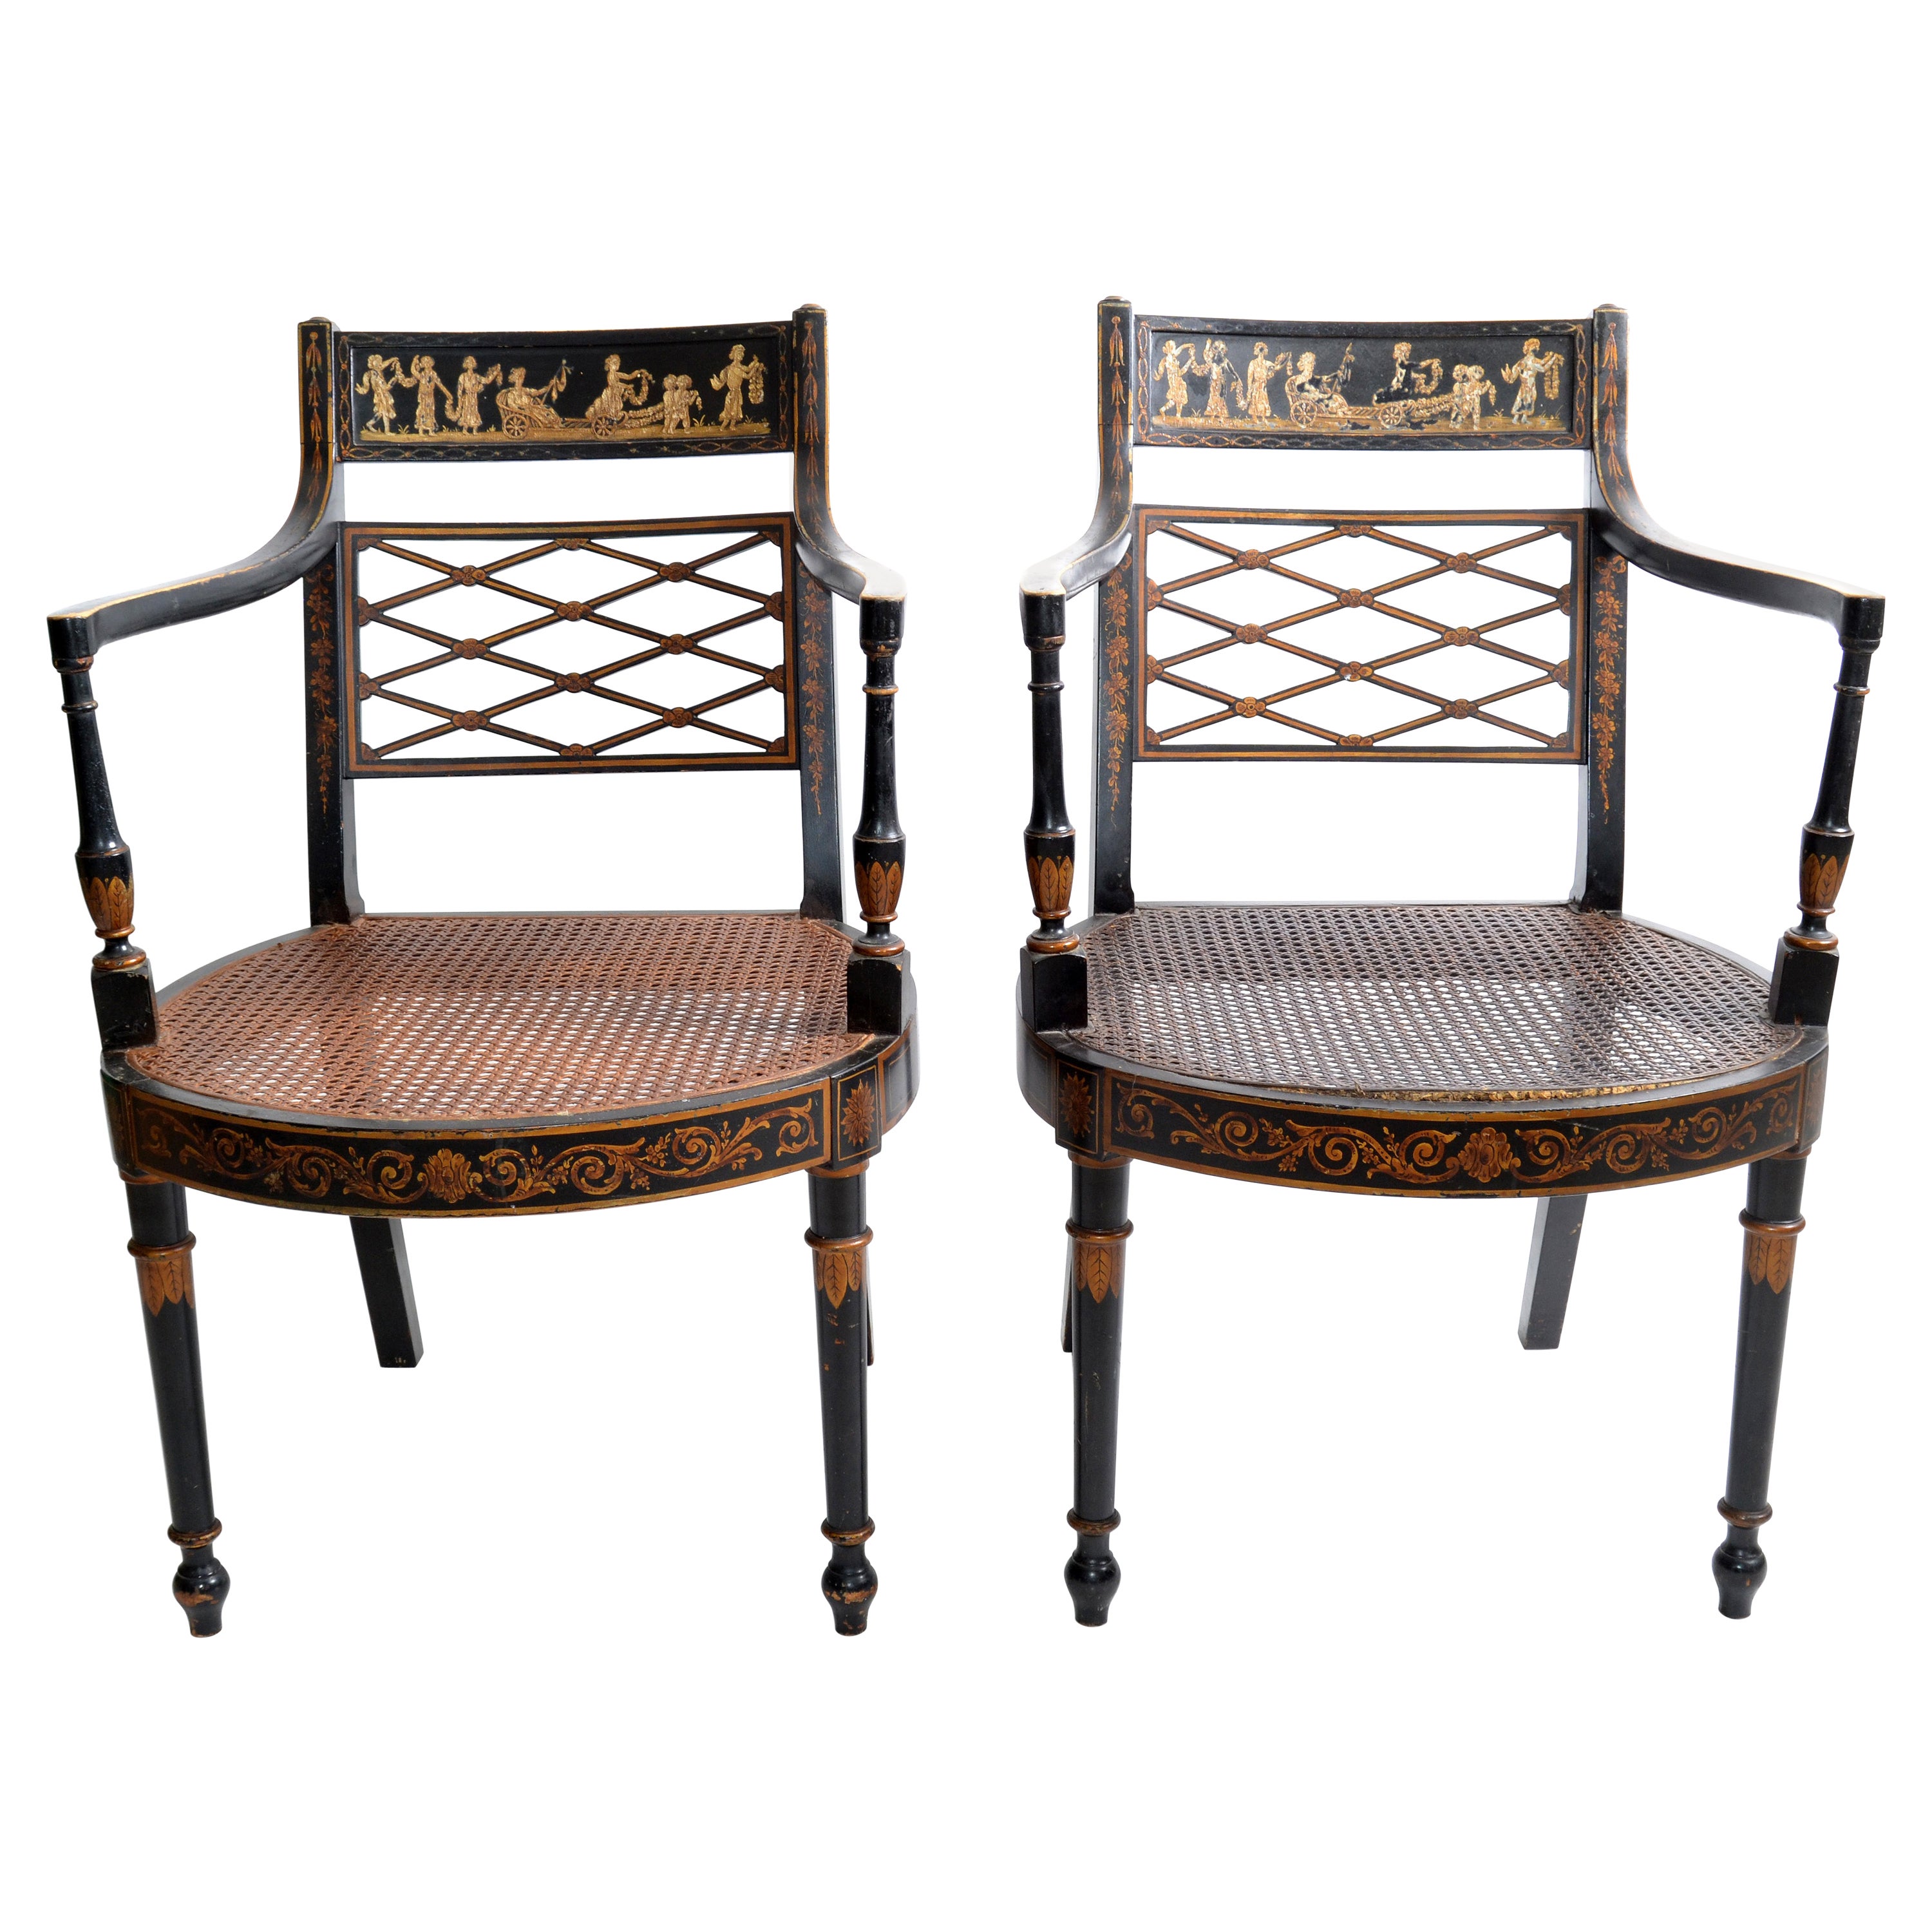 Asian Modern Antique Armchairs Black Lacquered & Gold Finish Cane Seat, Pair For Sale